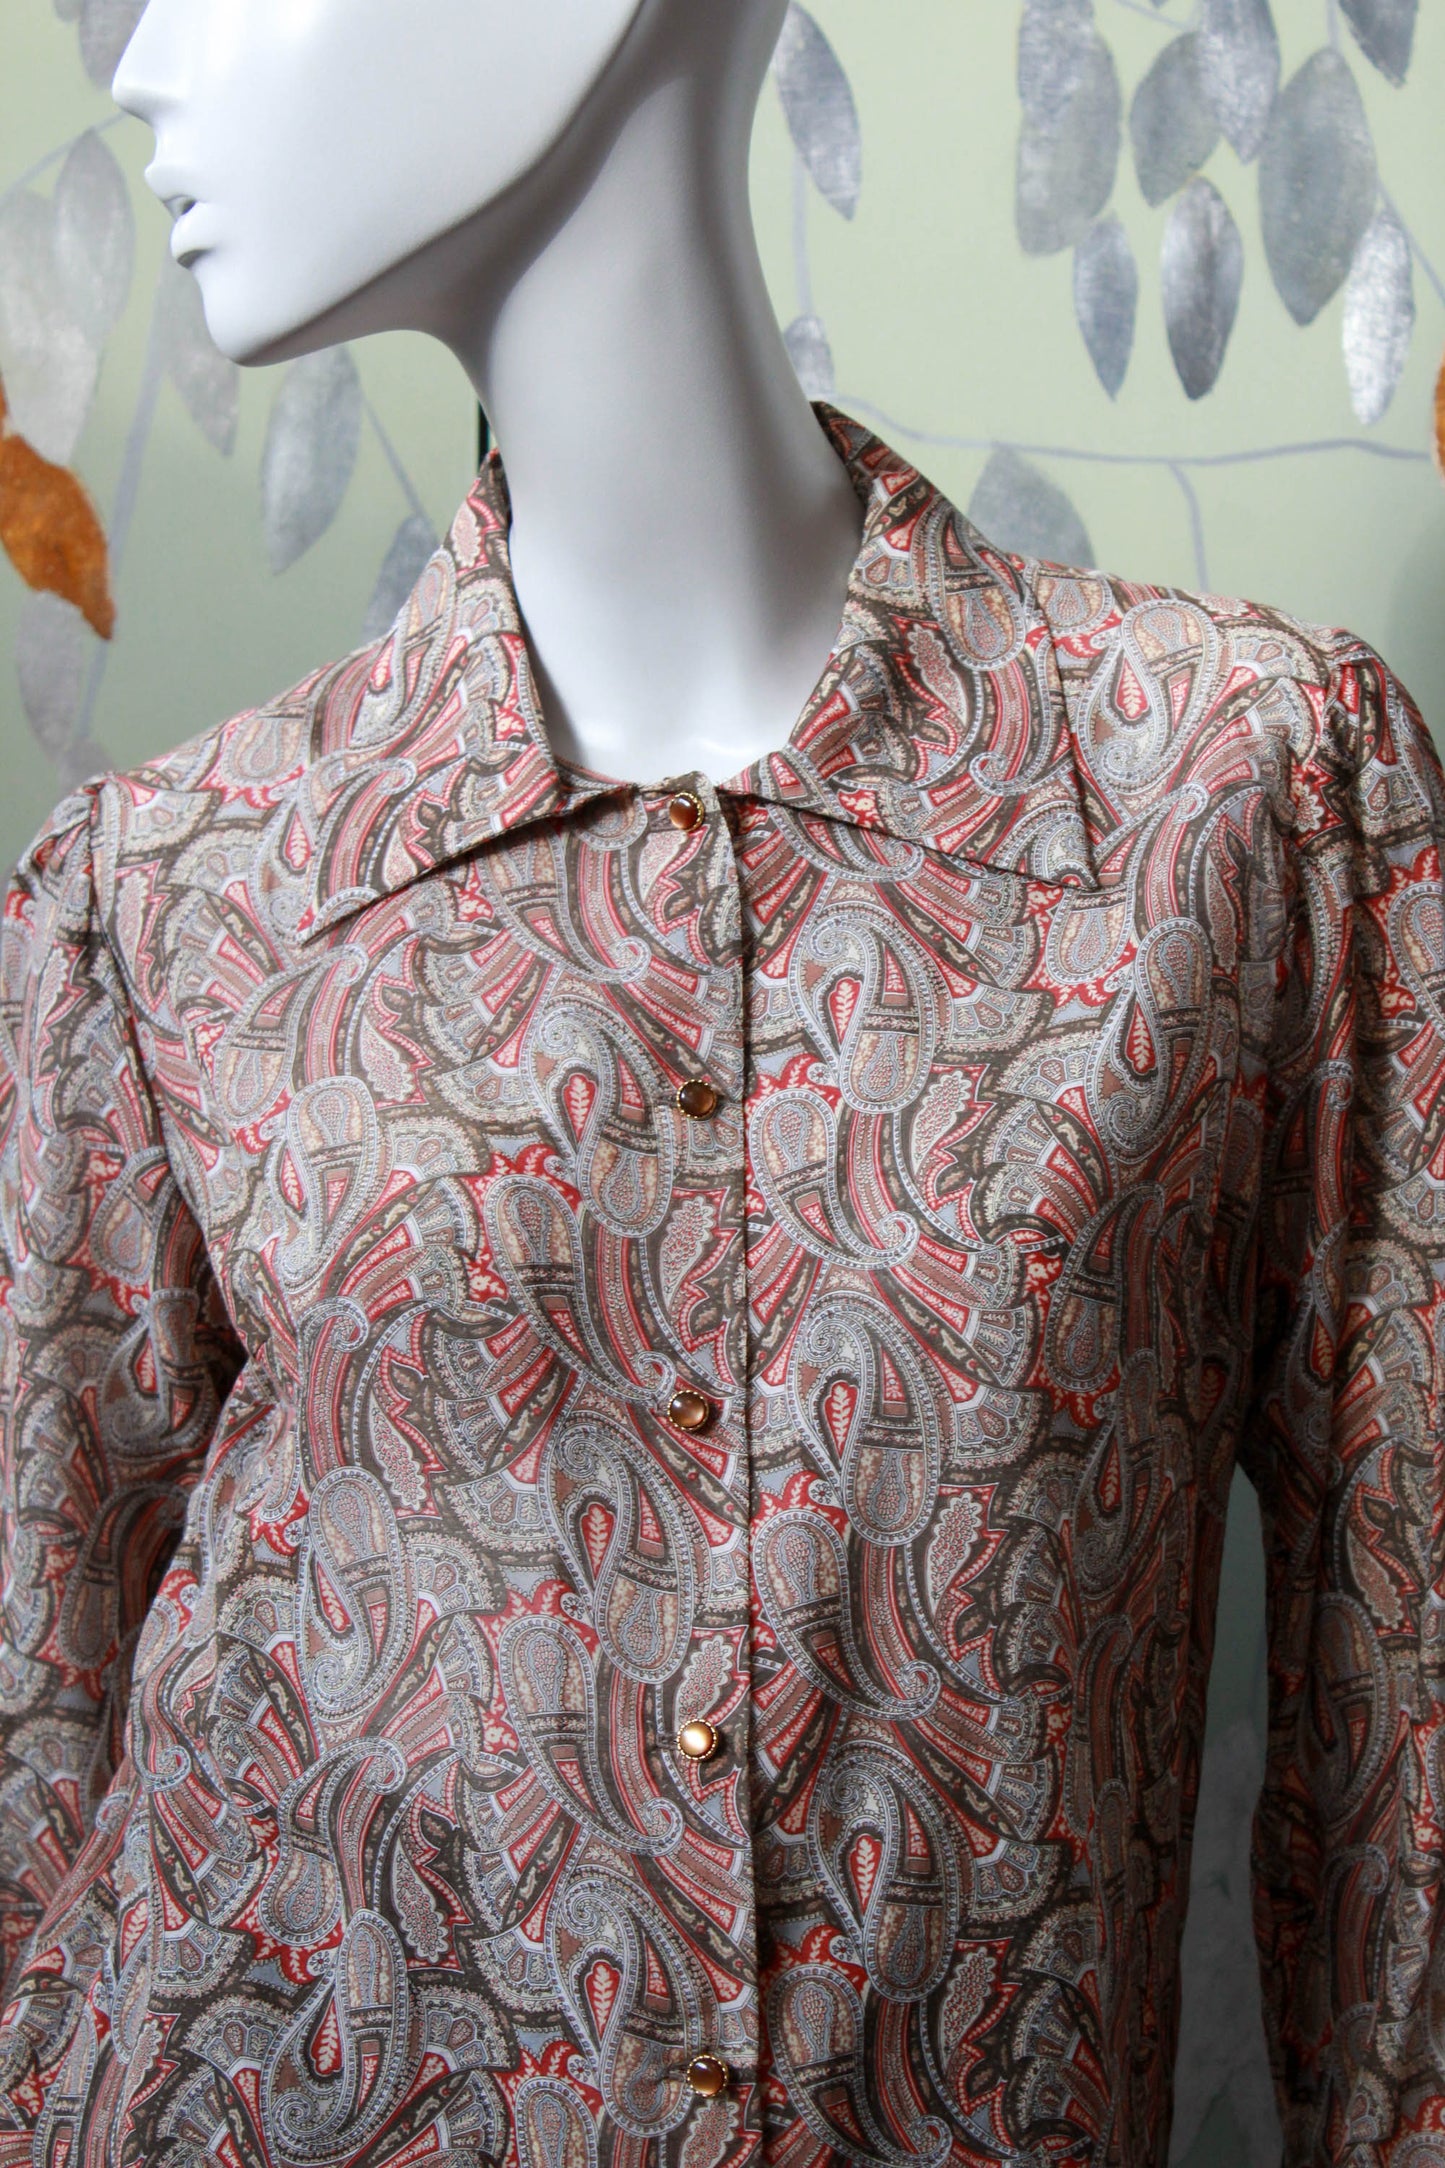 1970s style paisley print cotton blouse with spread collar, green and red paisley print